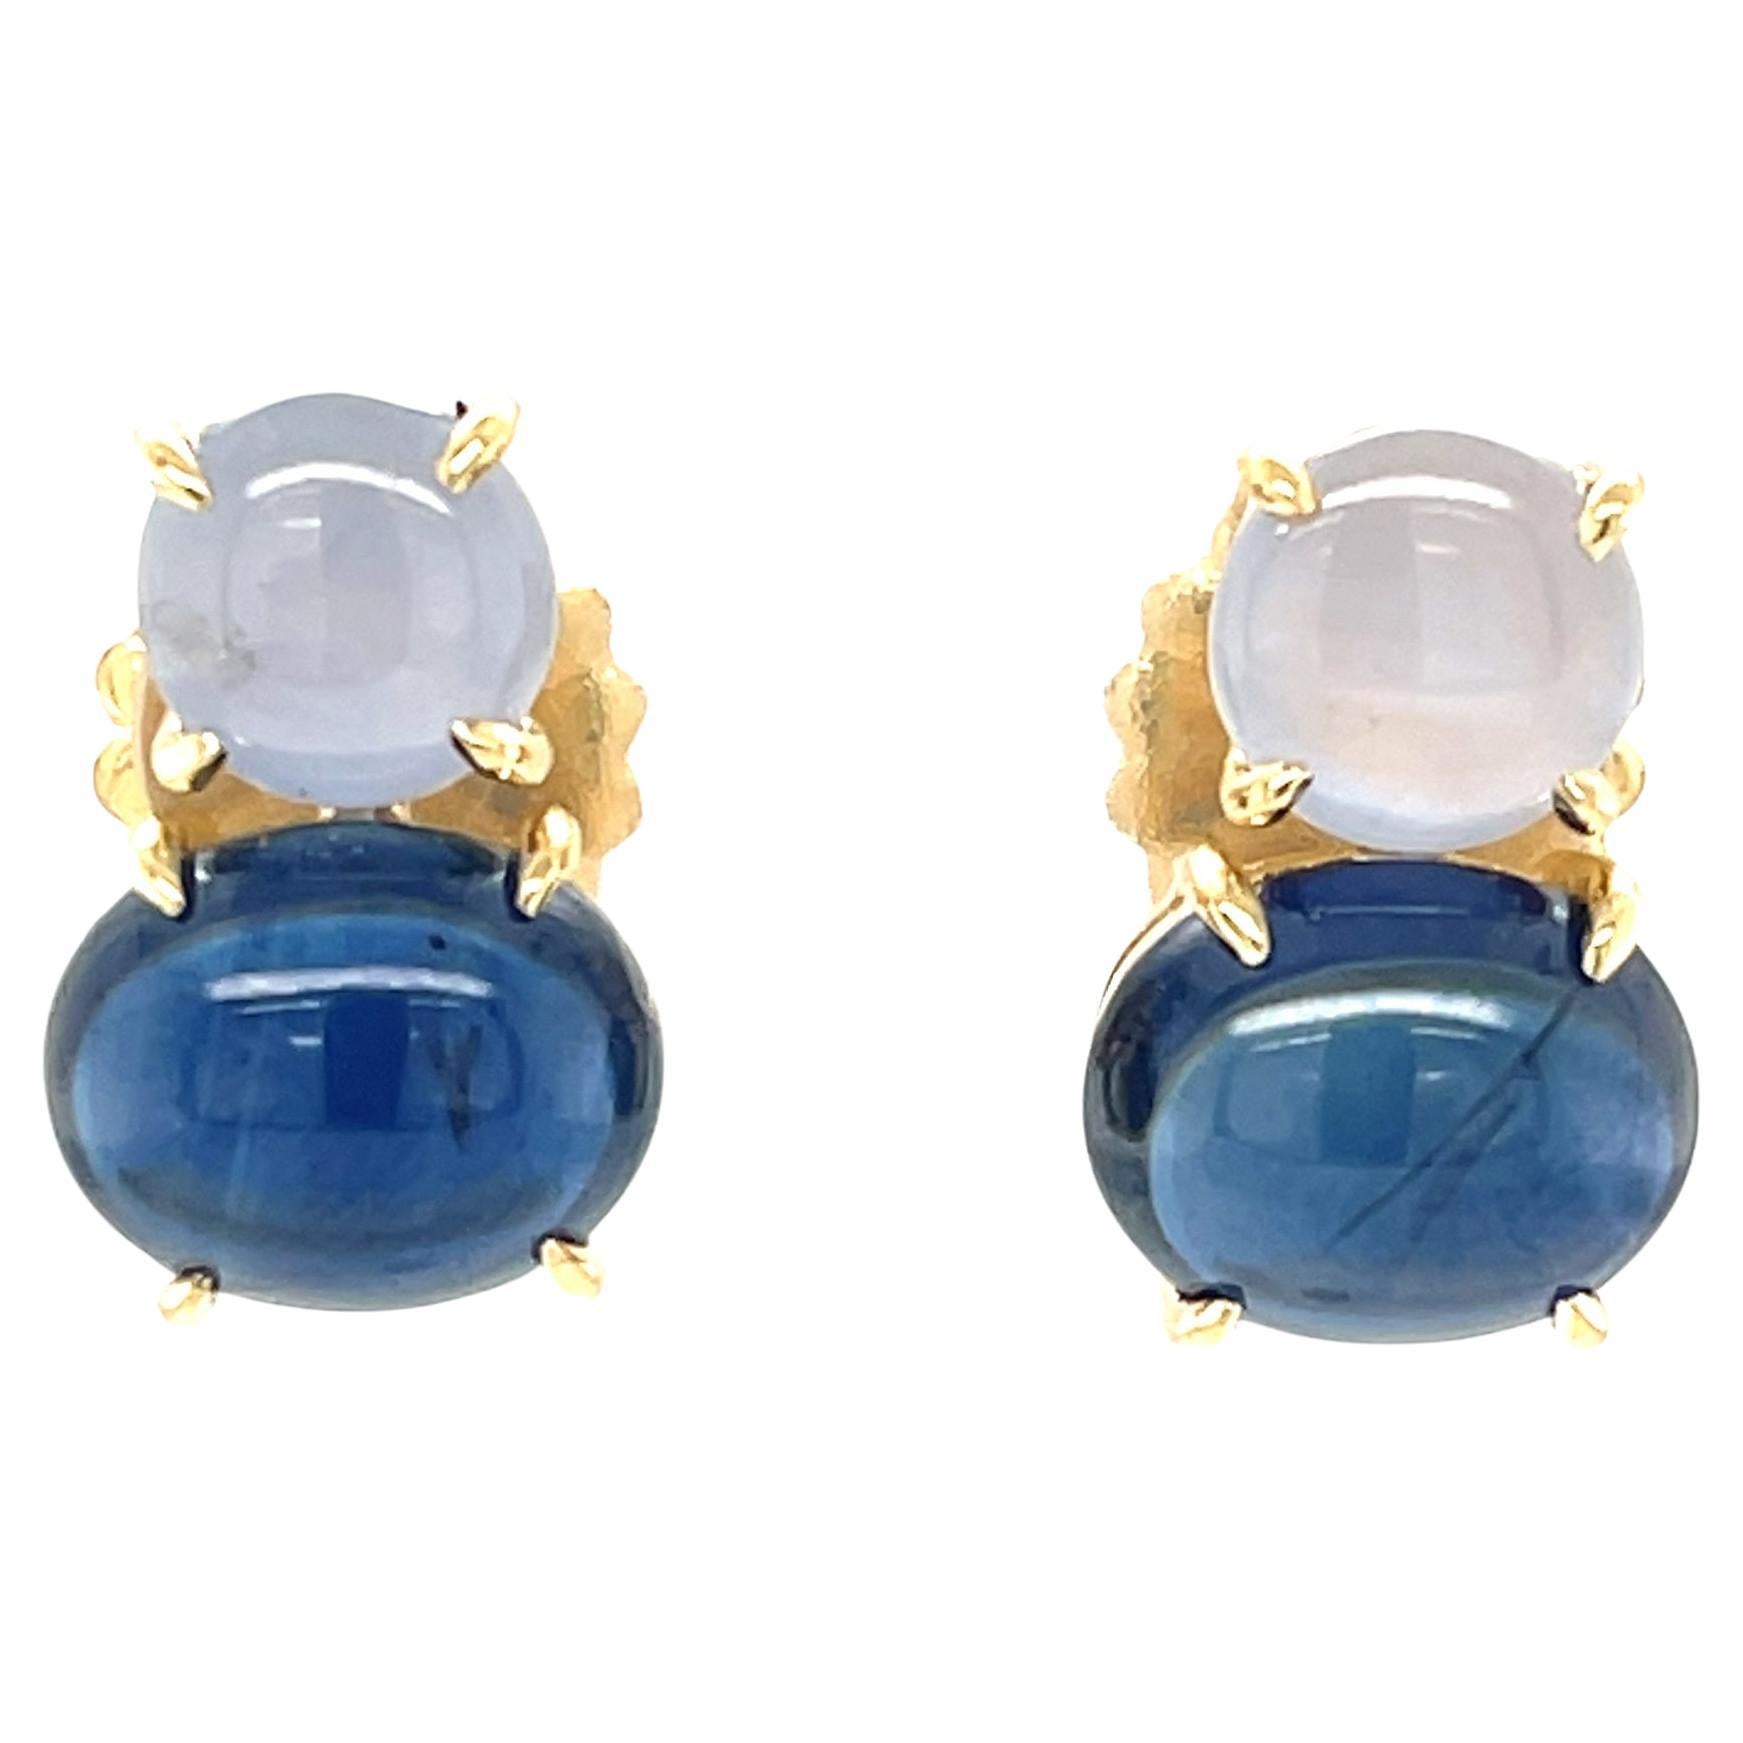 Blue Sapphire Cabochon and Silver Star Sapphire Earrings in 18k Yellow Gold